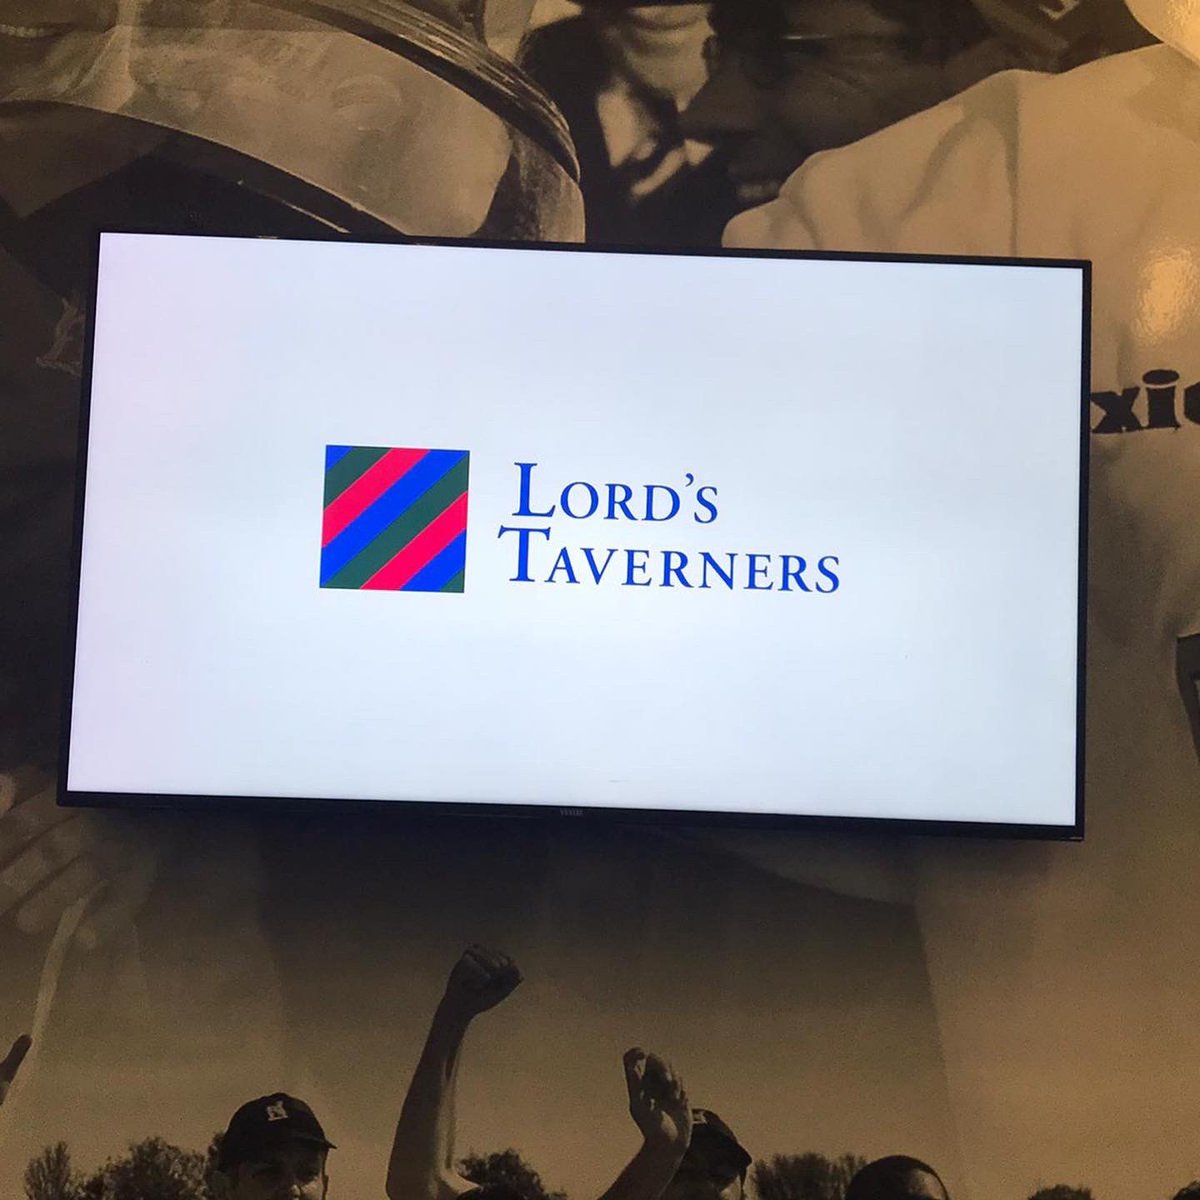 Yesterday we had the pleasure of delivering the @LordsTaverners West Midlands Christmas Lunch at @Edgbaston Guest speakers included Sir Clive Woodward OBE and Geoff Miller OBE A great day of festivities and fundraising! *Official photos to come*